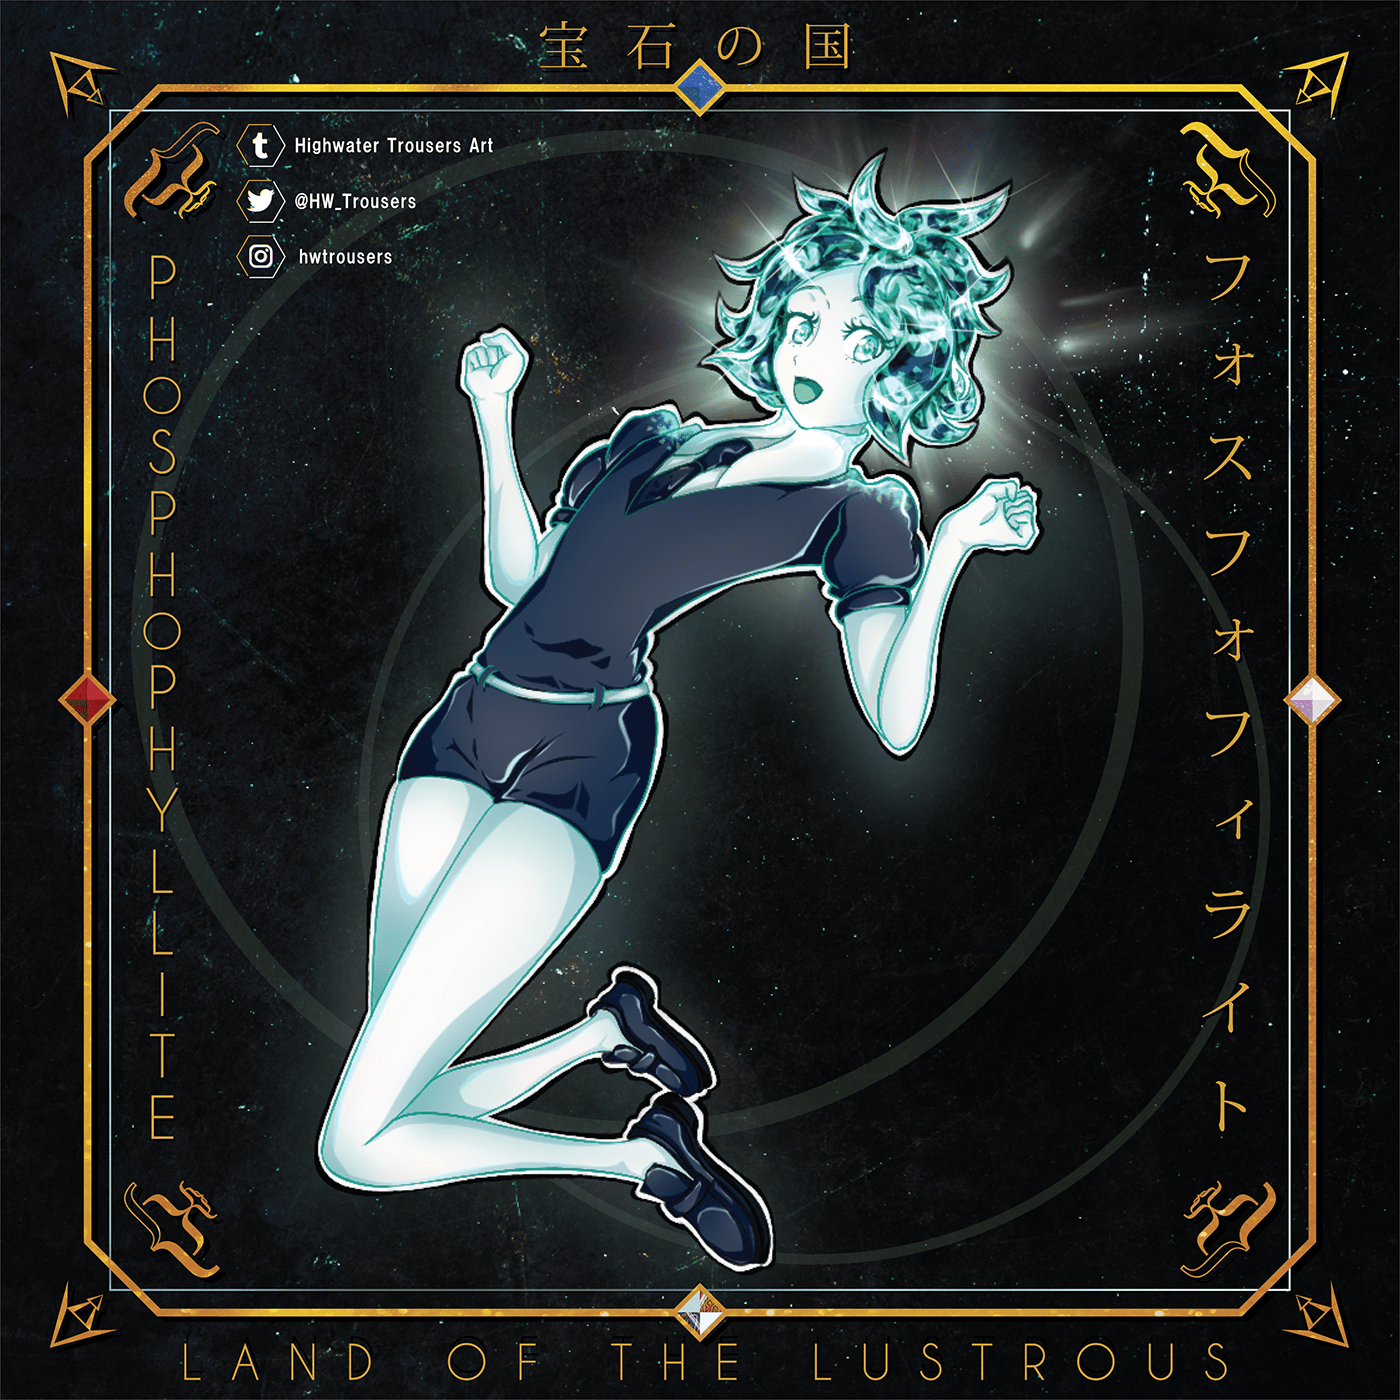 Phosphoyllite, the best gem from the hit show Houseki no Kuni / Land of the Lustrous.